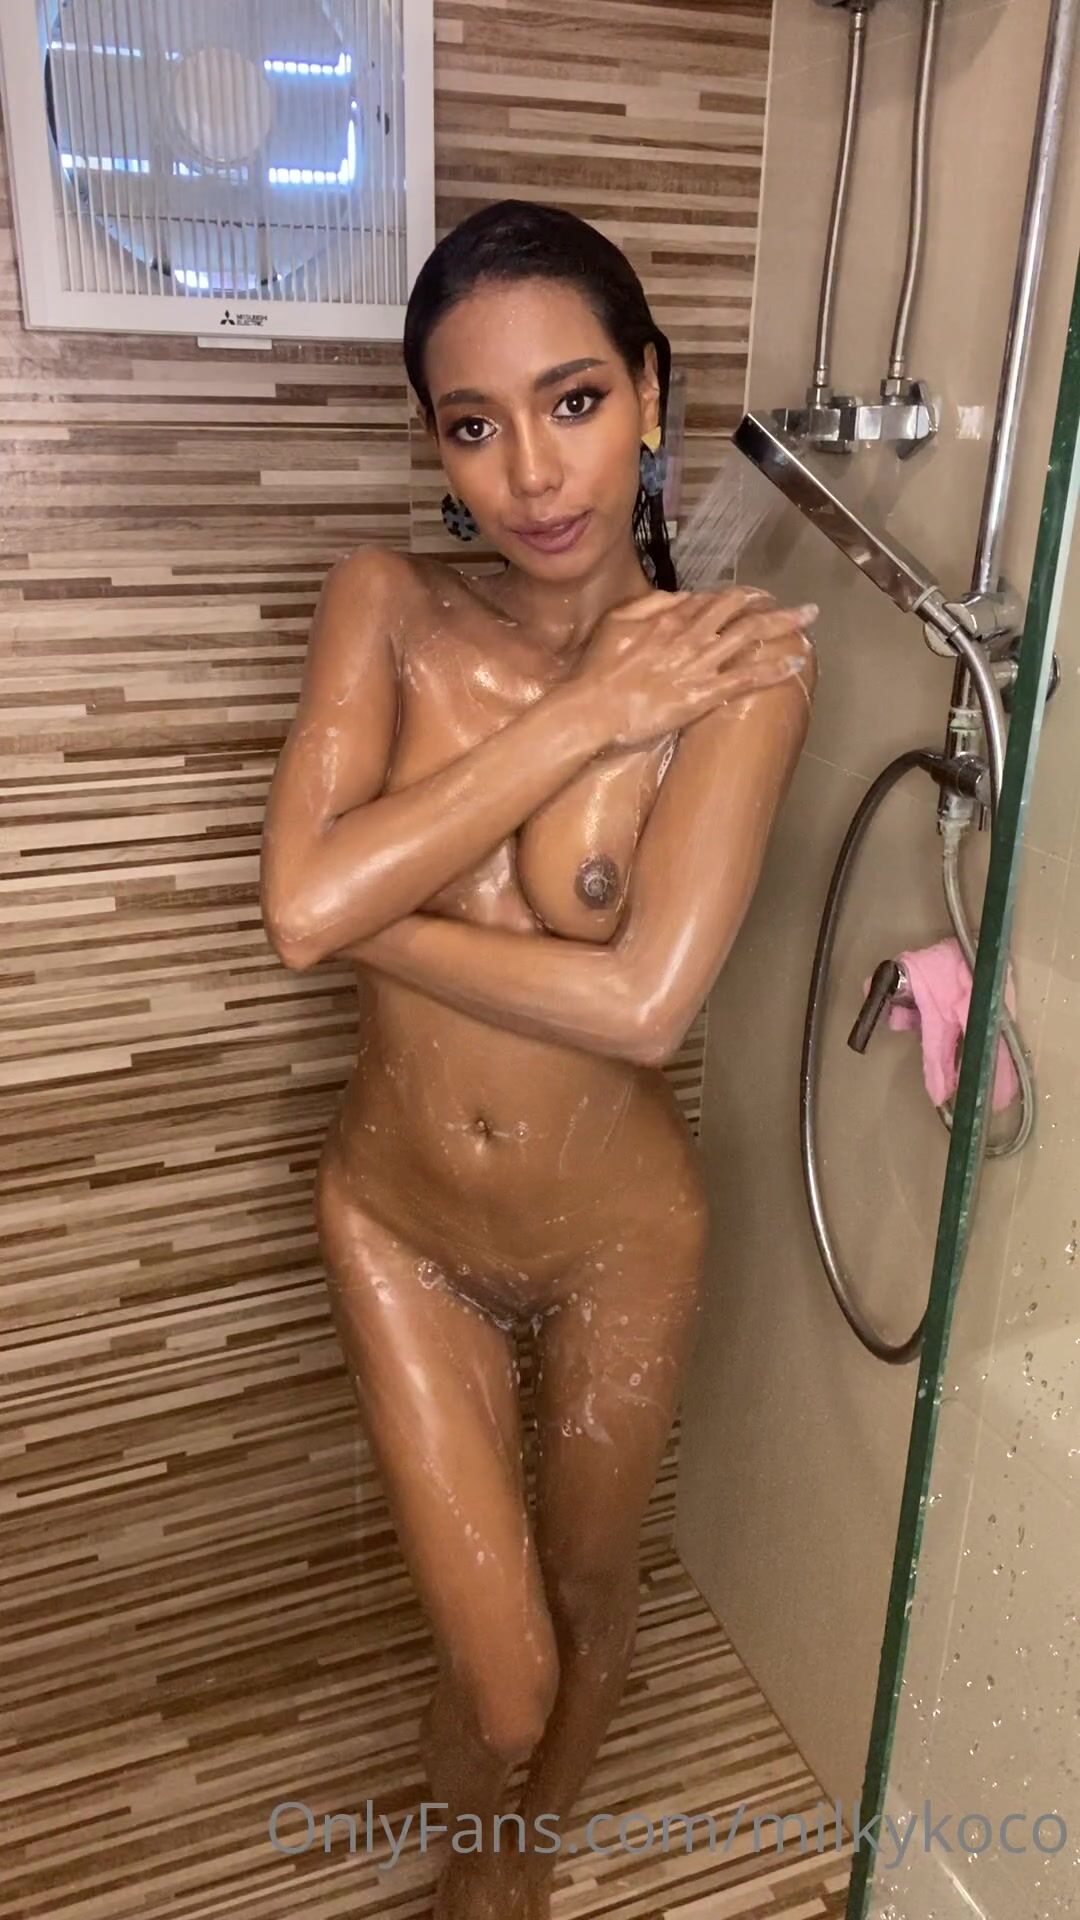 Milky coco taking a shower